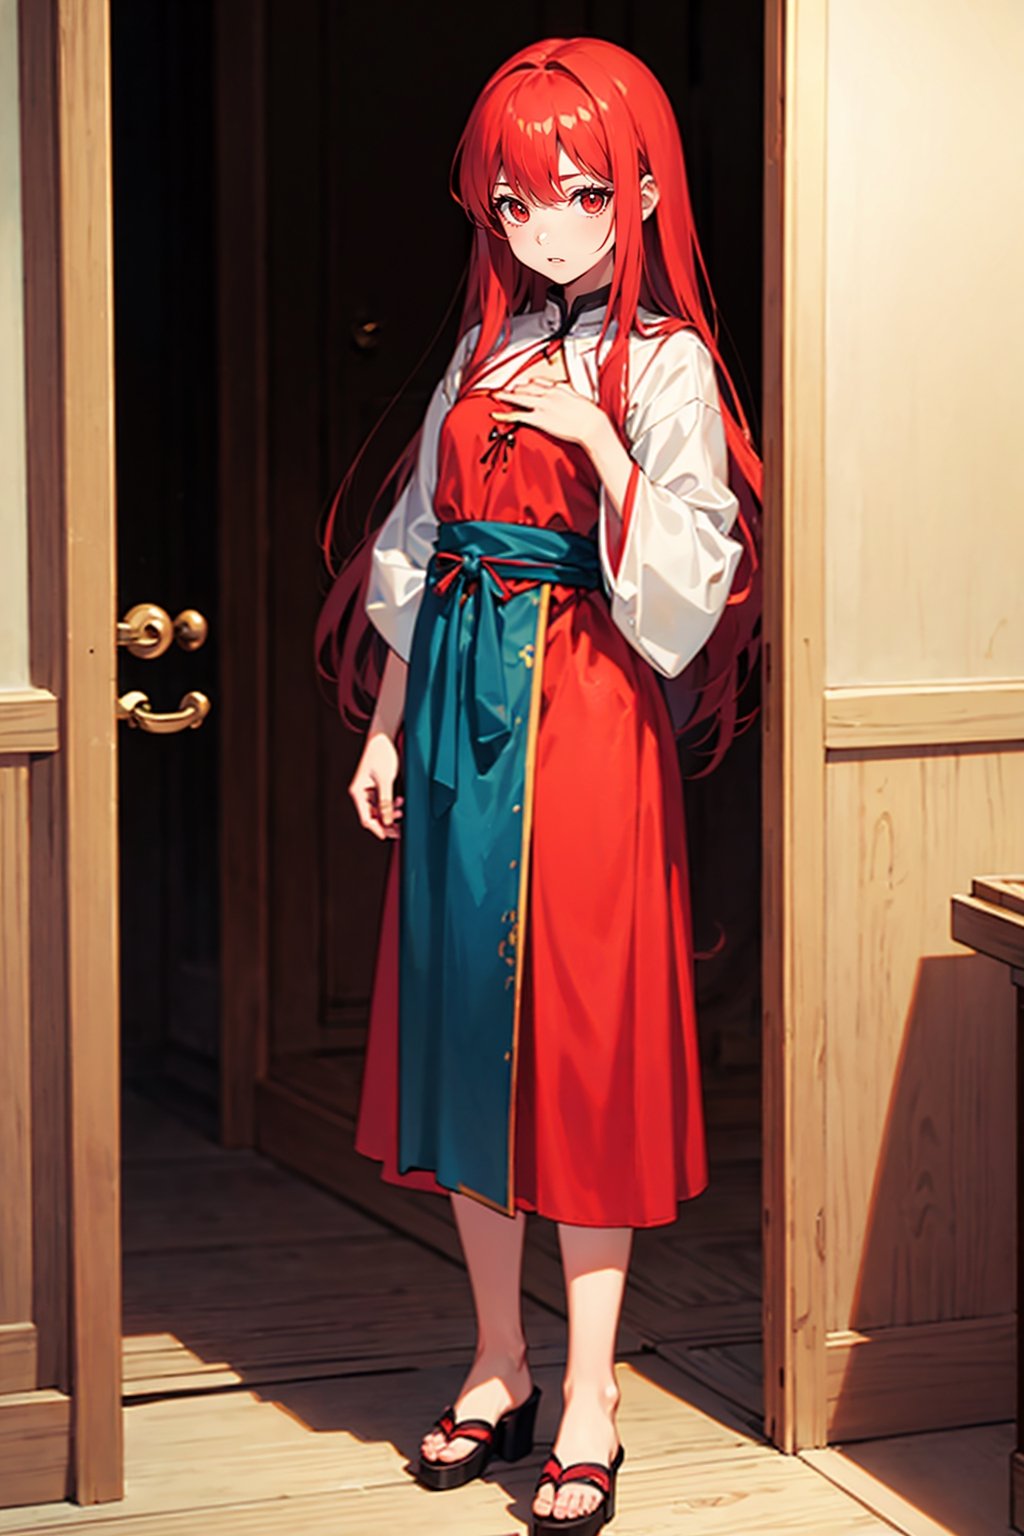 , woman, ,red_eyes,red hair, 15 years ago, long_hair, short woman, woman solo,, behind_form a door, flat_chest ,aachisato, peasant clothes, woman with short stature, high_resolution, small, tiny
